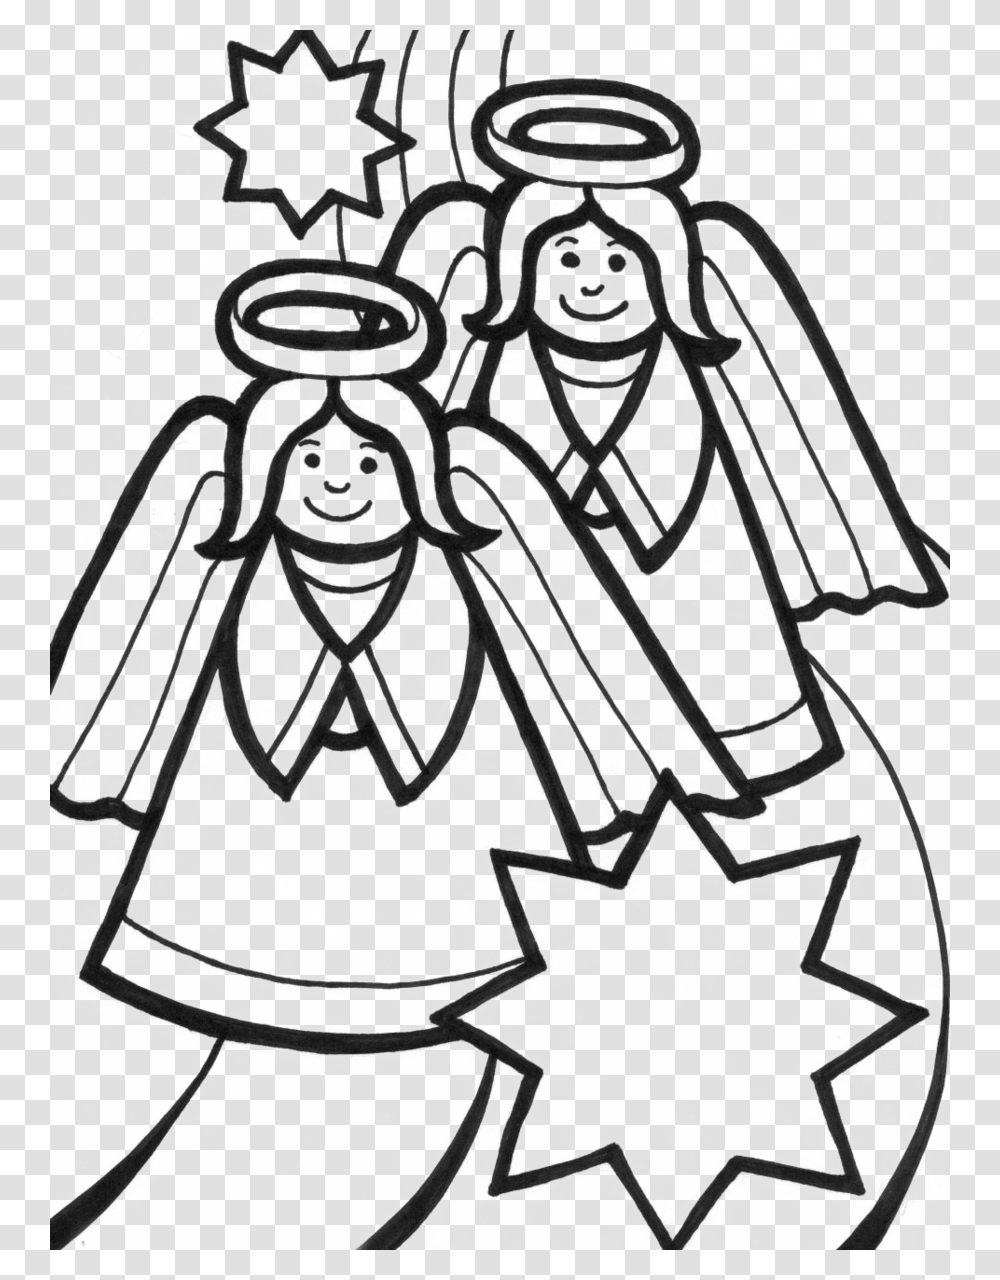 Download Coloring Sheets Christmas Angel Clipart Christmas, Stencil, Drawing, Doodle, Sketch Transparent Png